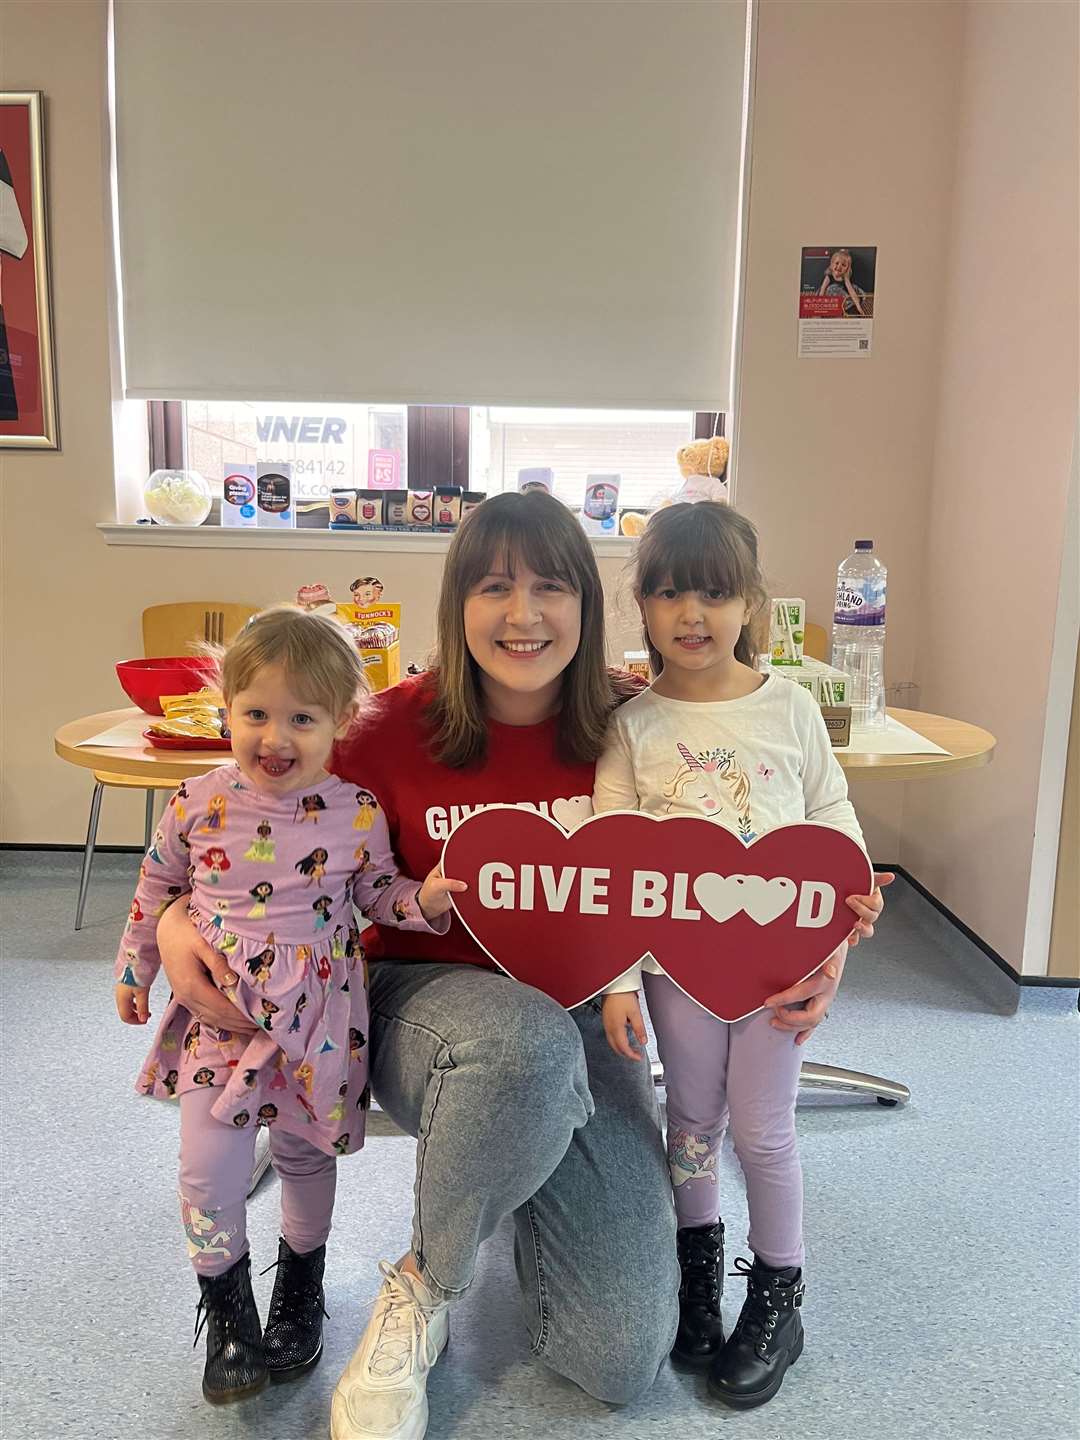 Kate Macrae and daughters Abigail and Hollie are grateful for the blood donor service that saved her life.